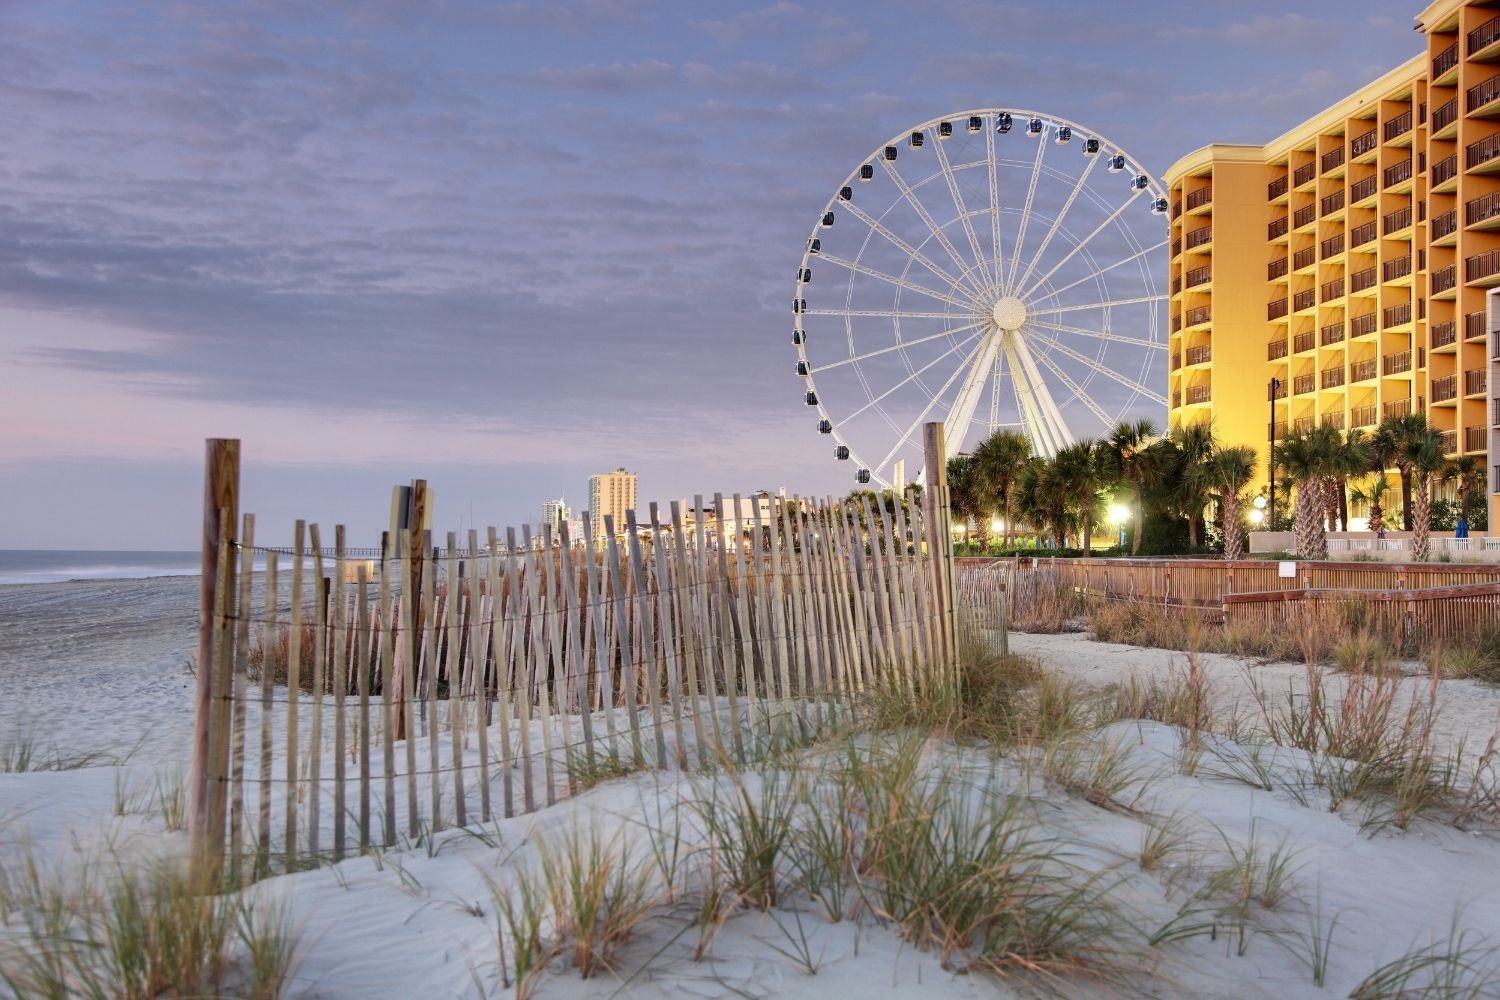 things to do in myrtle beach